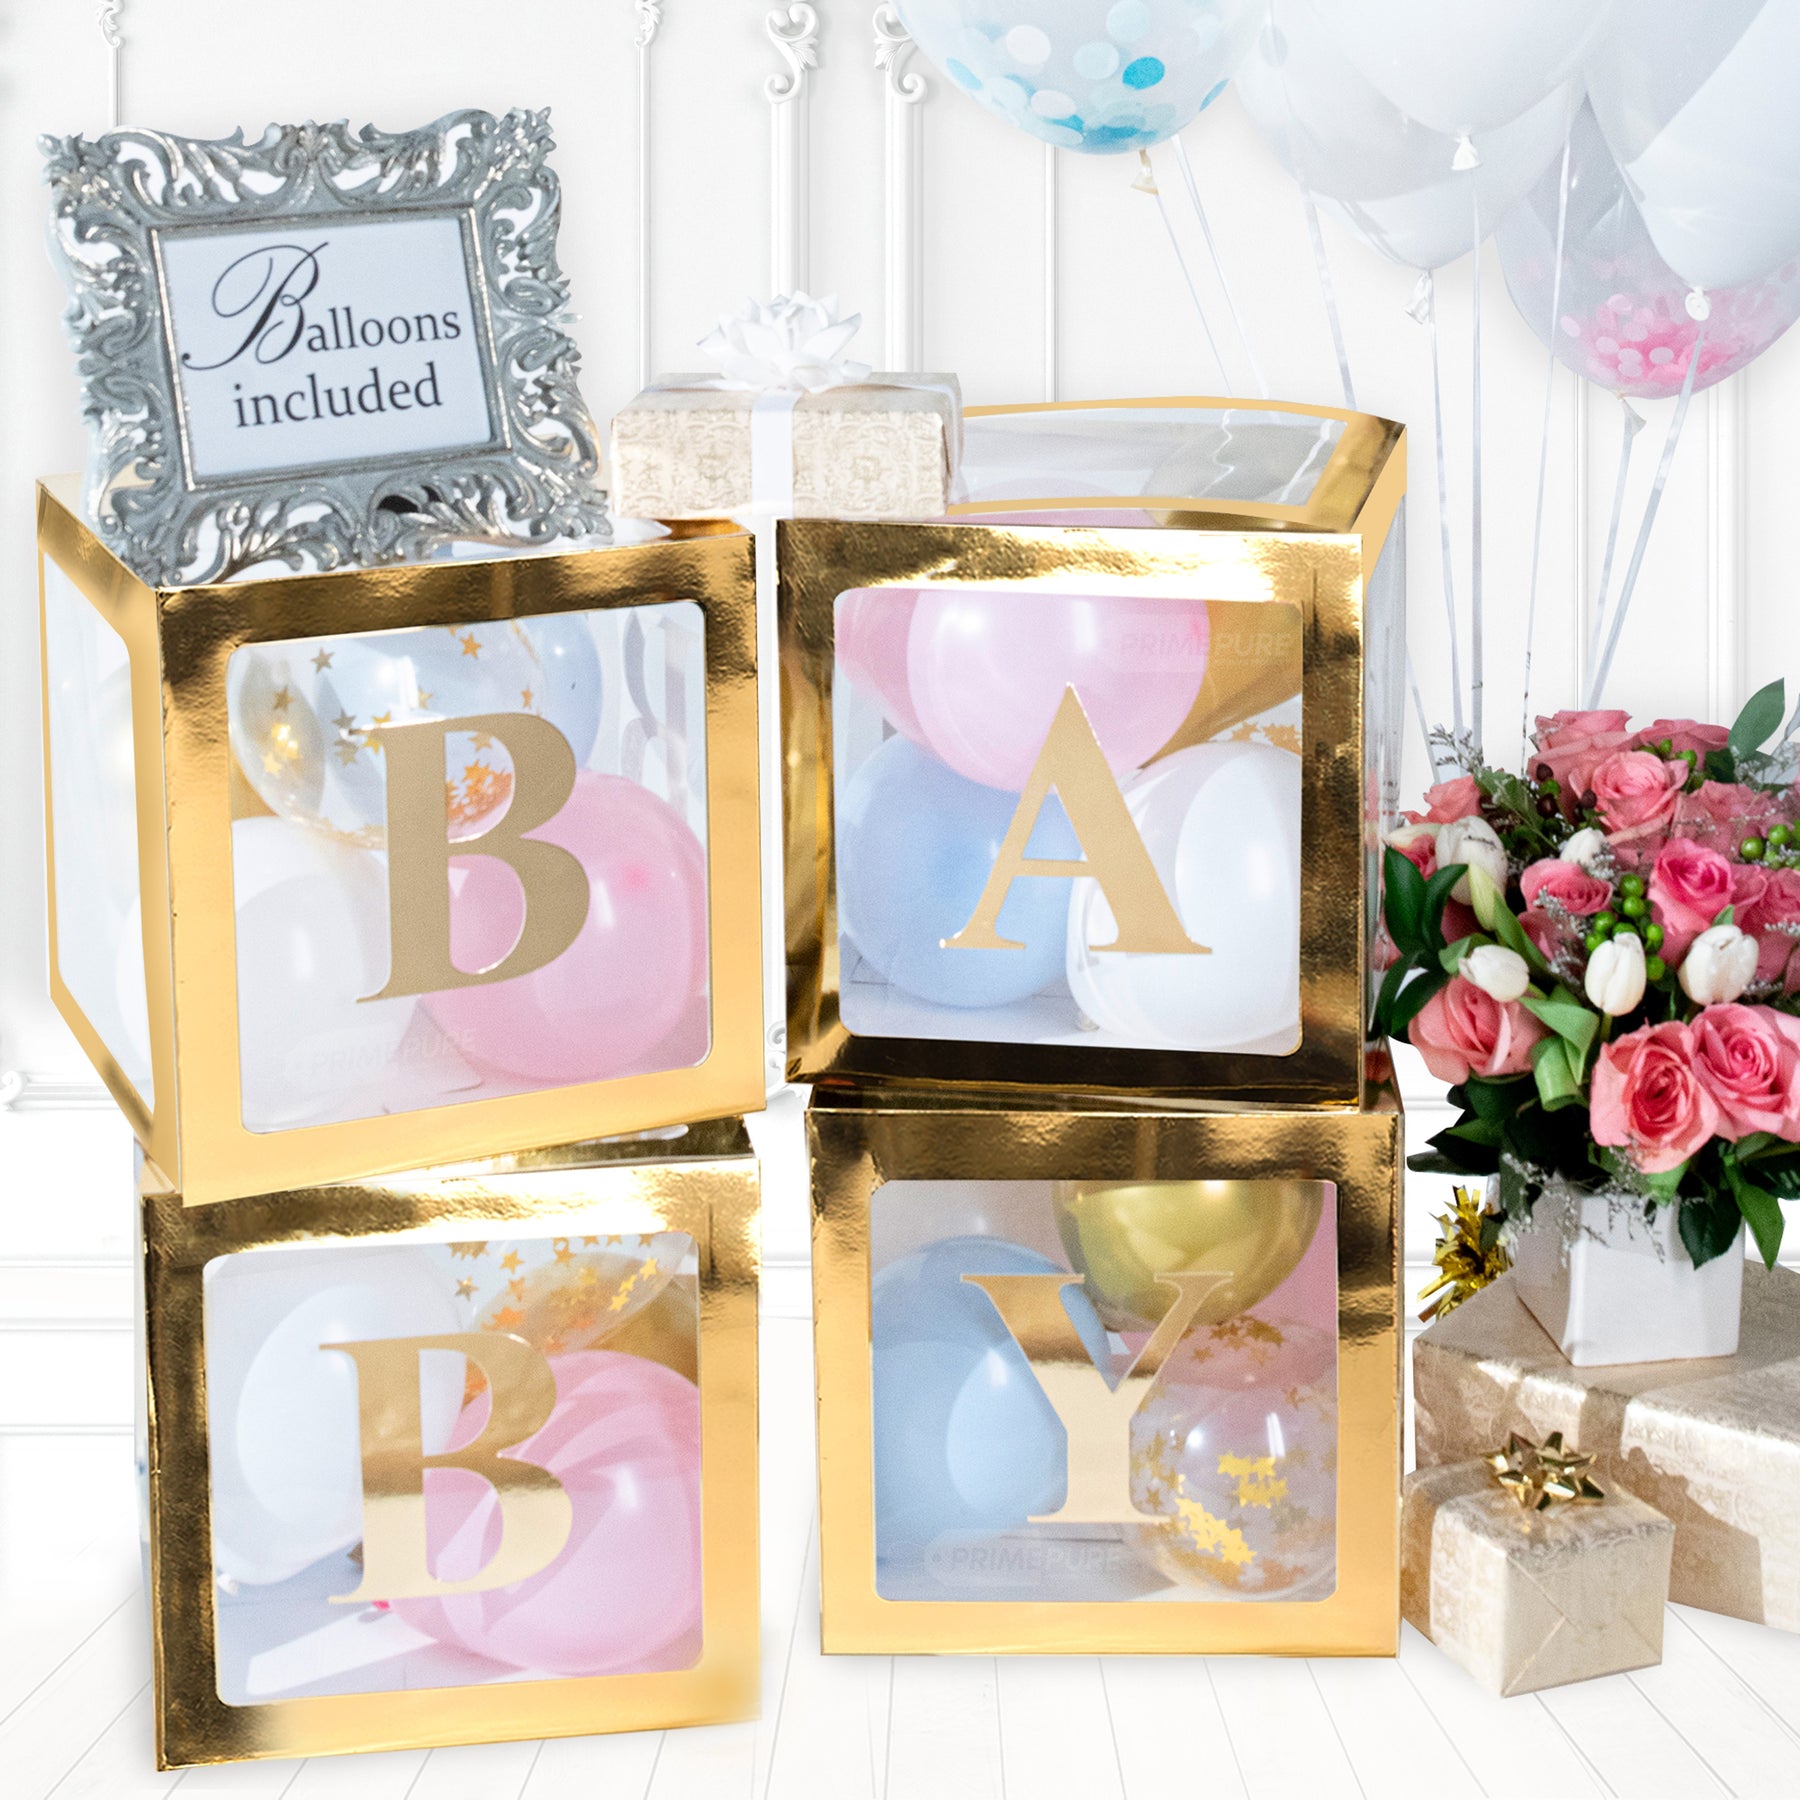 1st Birthday Balloon Boxes for Baby Party Decorations ONE Box with Letter  for Boy&Girl Baby Bridal Shower, Reveal Party Decorations